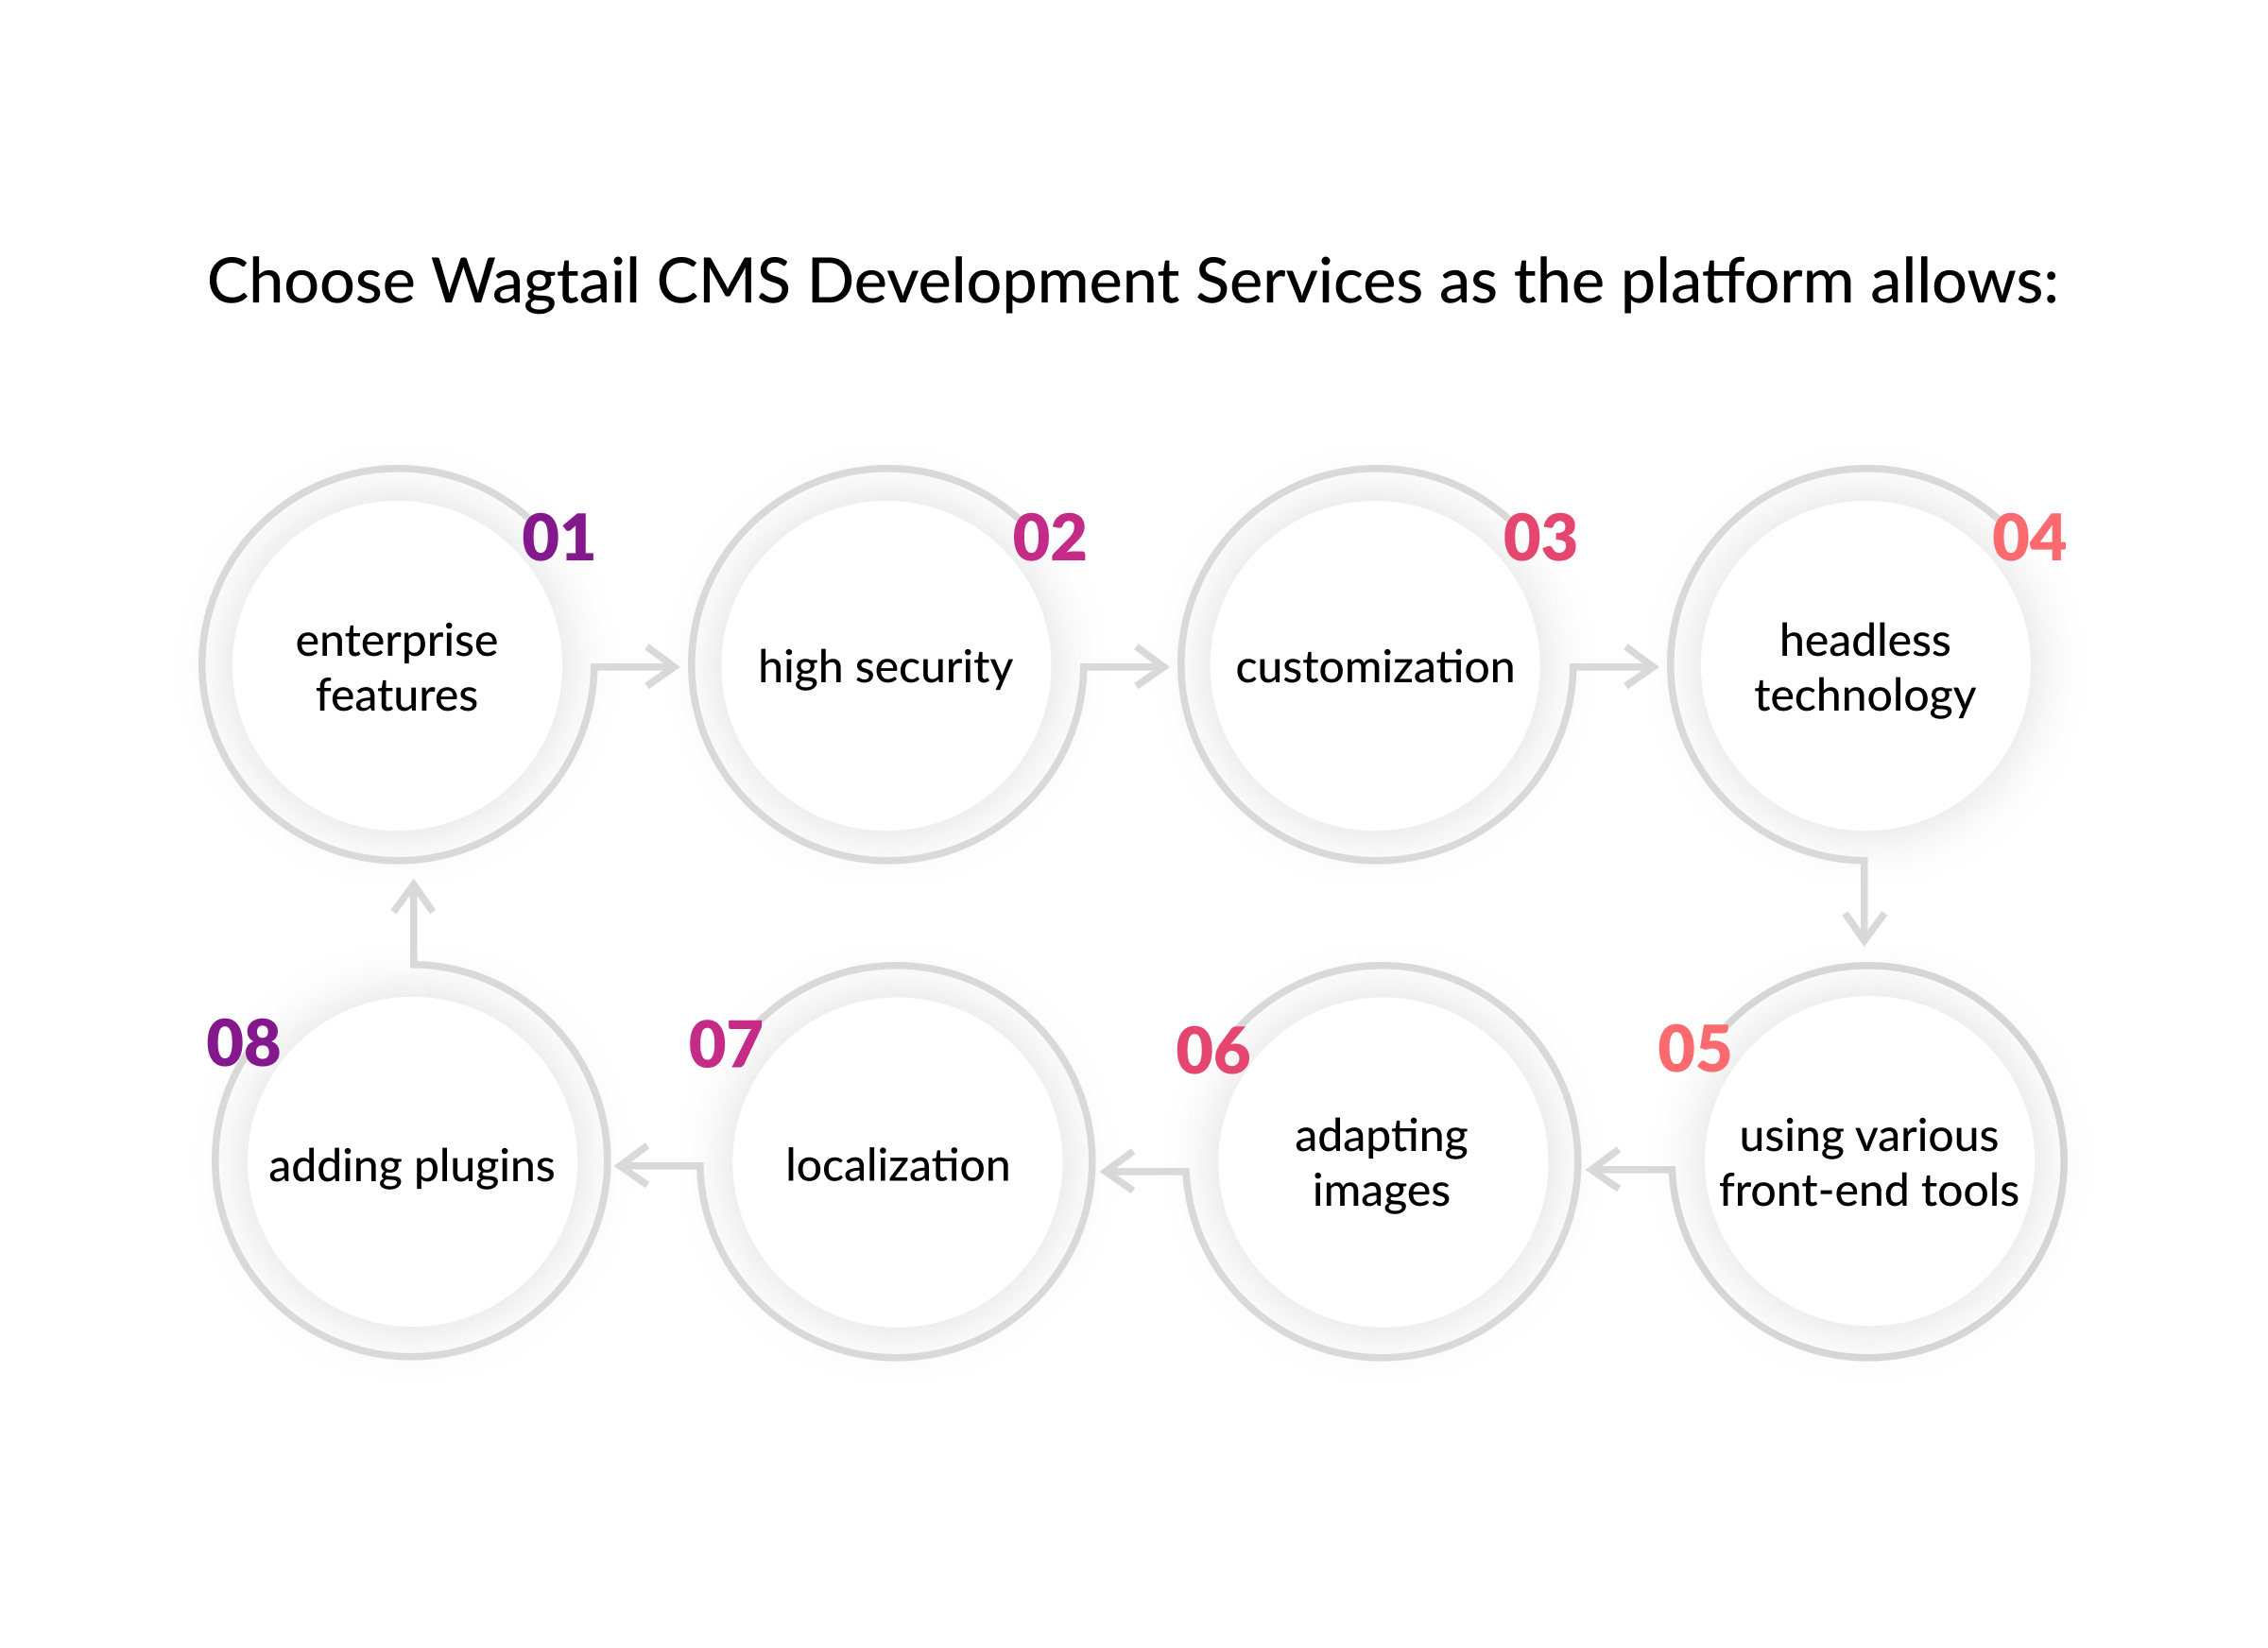 wagtail cms development services main features